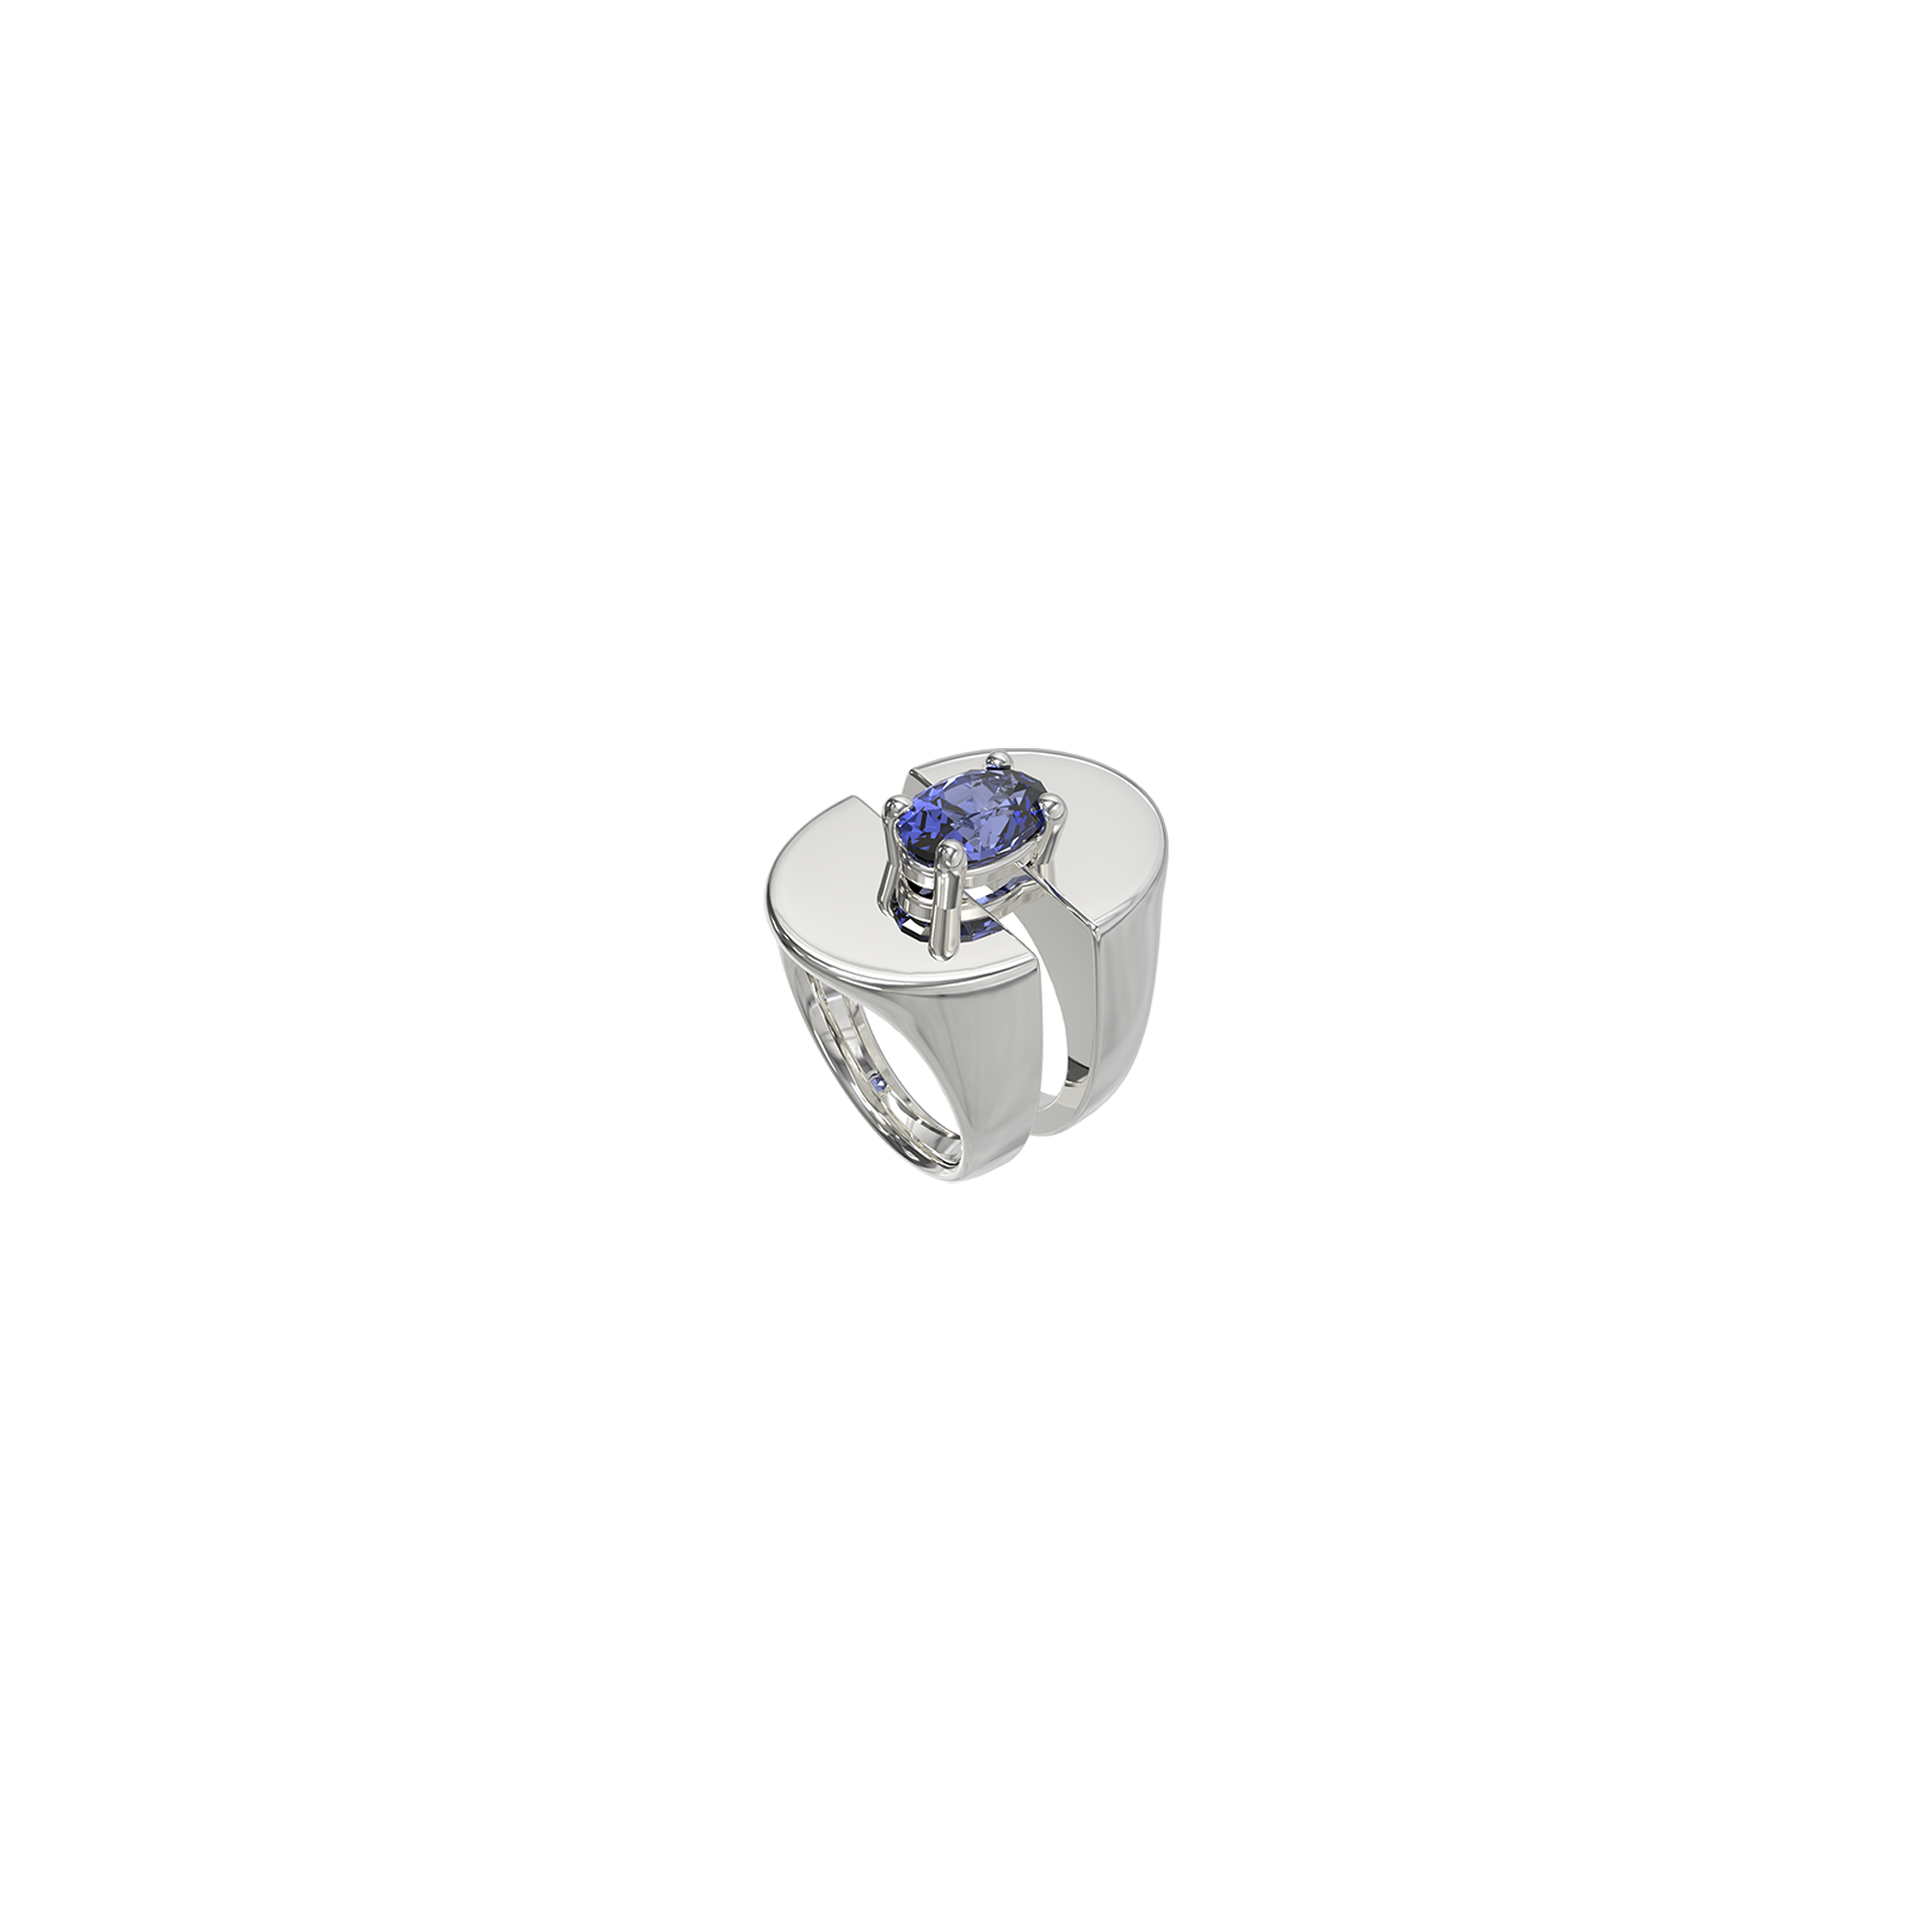 ELECTRIC BLUE SPLIT STRUCTURE RING